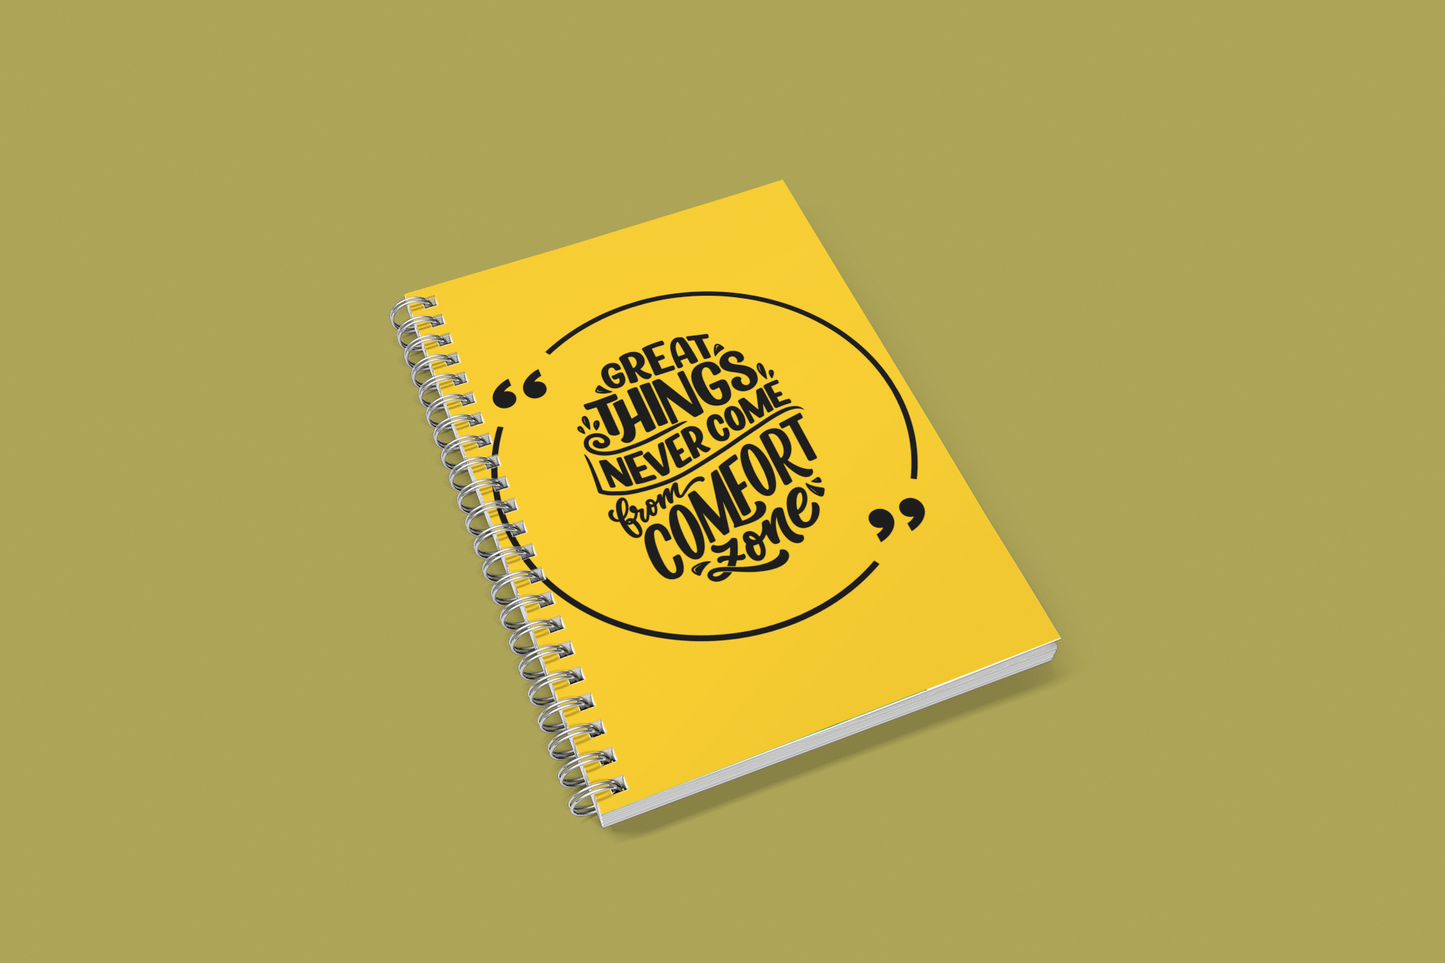 Great things never come from comfort zone Notebook